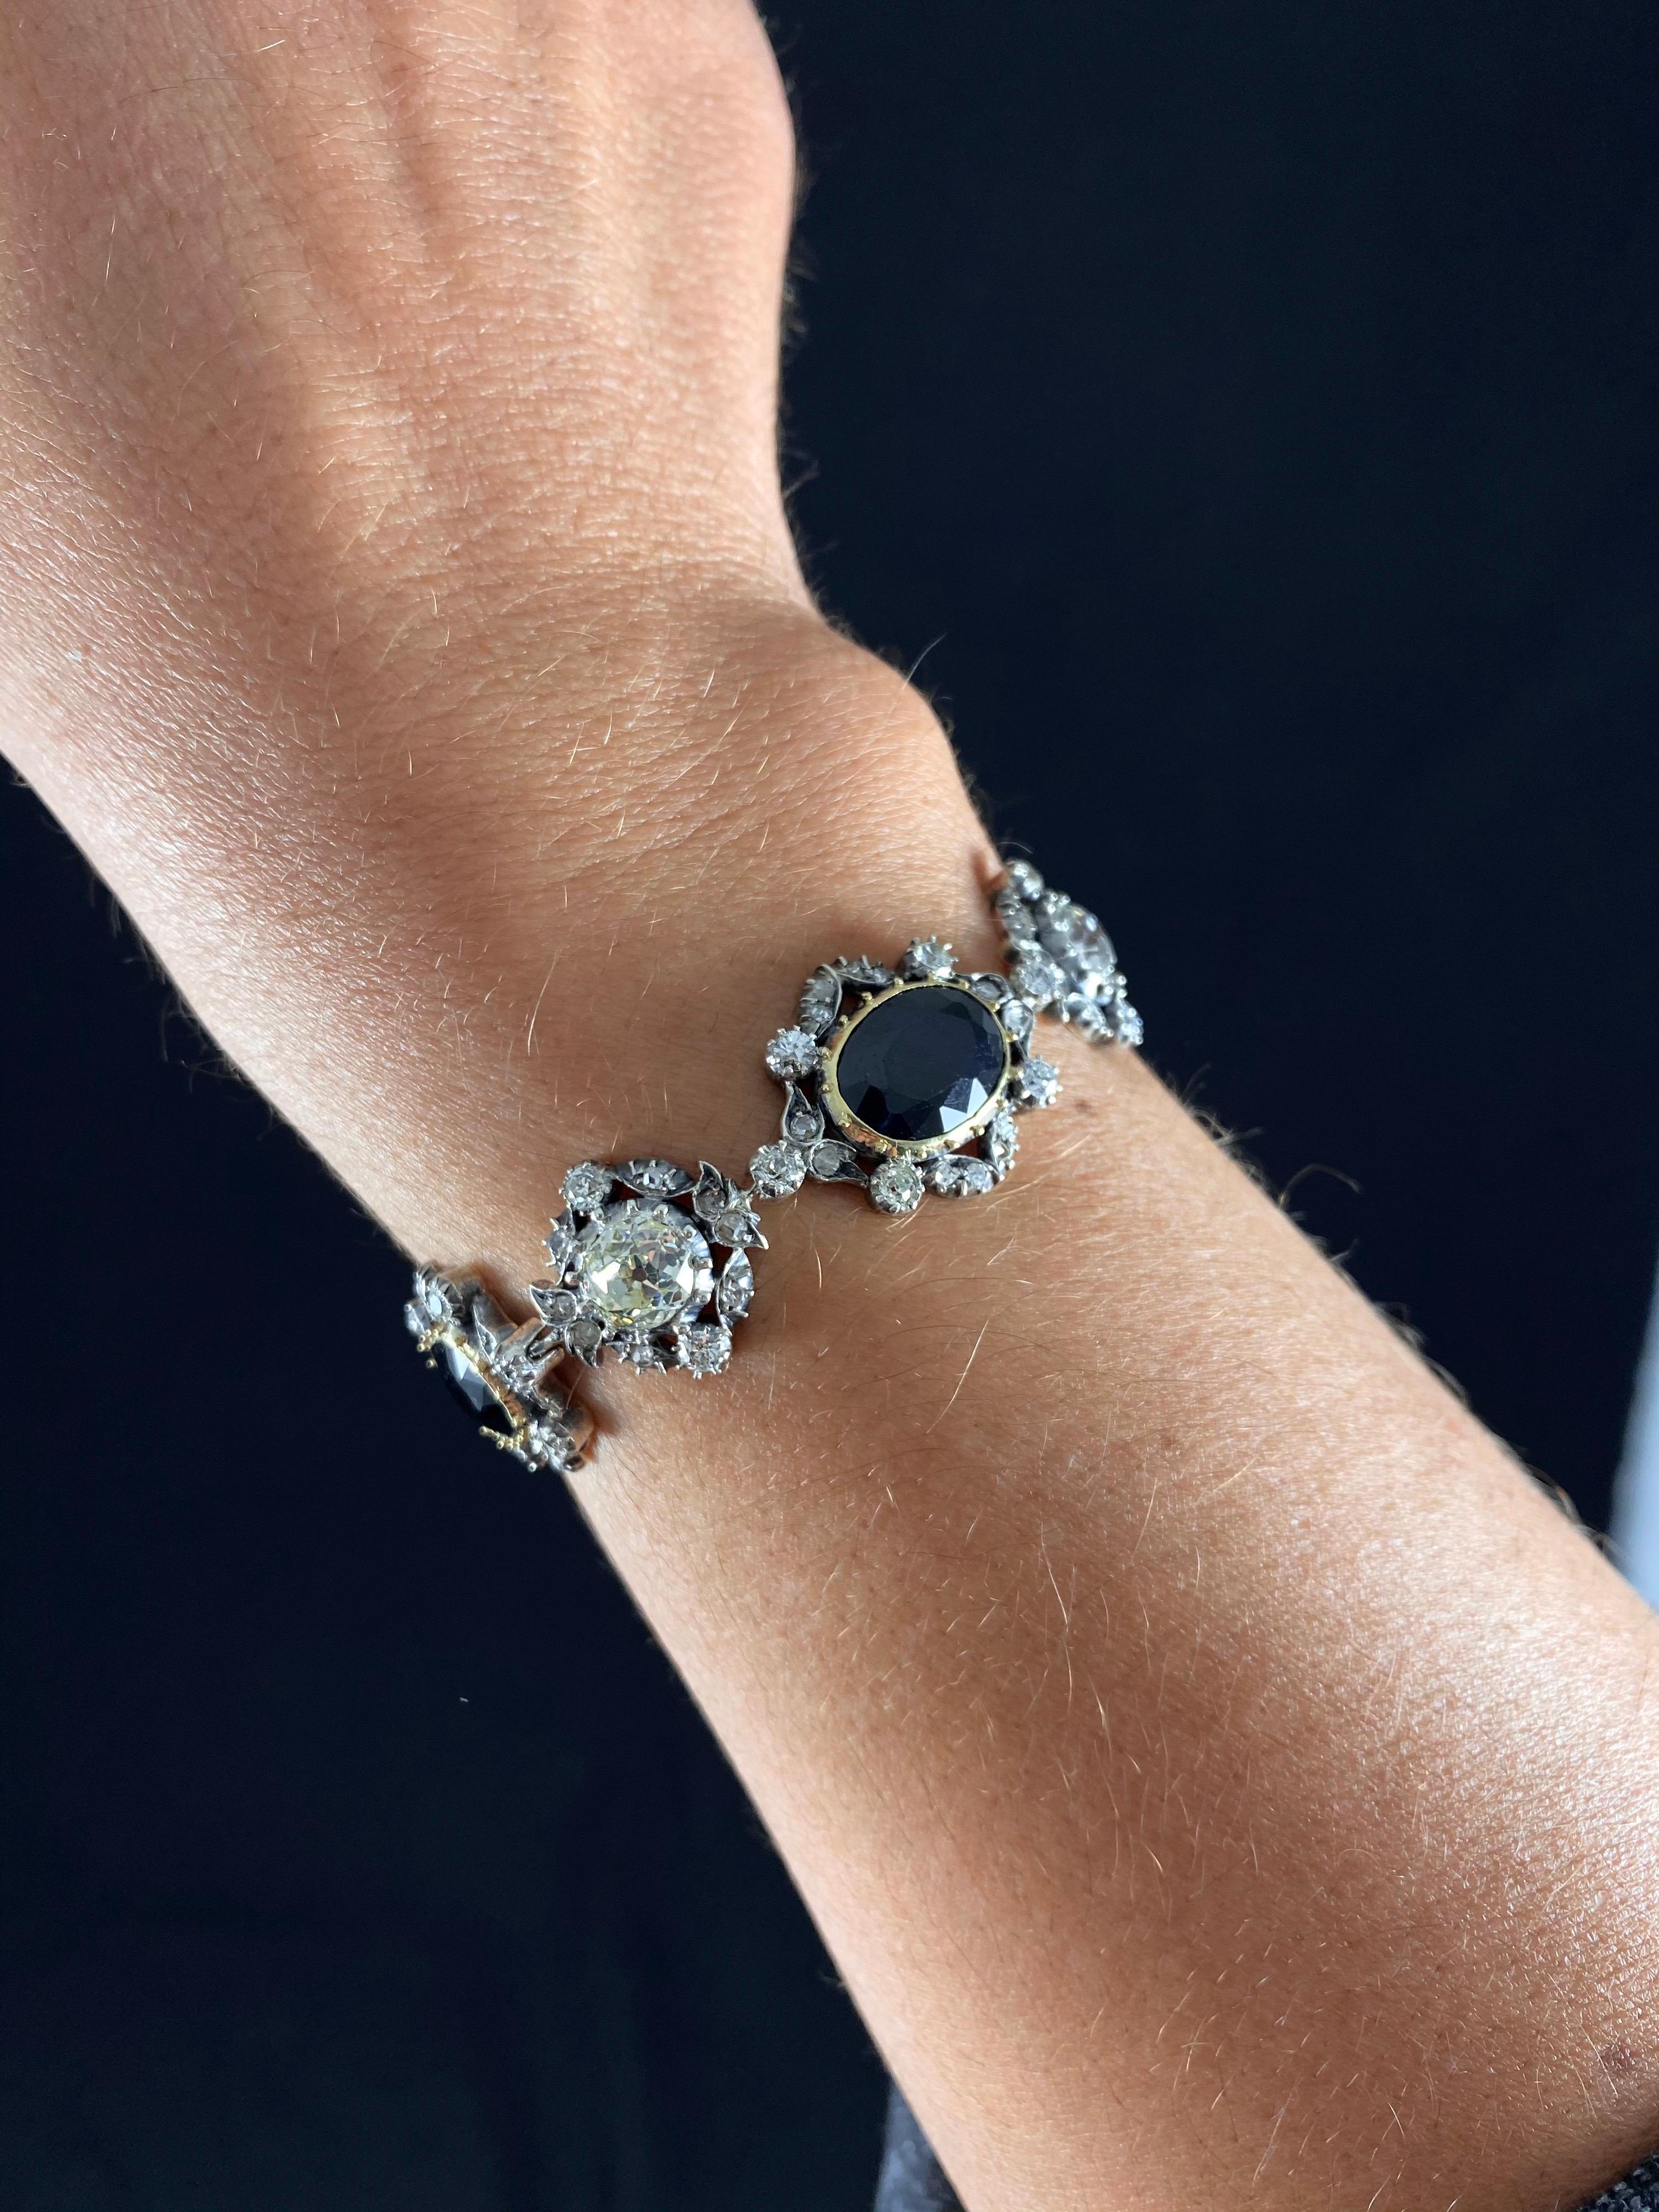 Antique Victorian 11.56ct Sapphire and 5.40ct Old Cut Diamond Bracelet in Silver and Yellow Gold, circa 1890. A late 19th century jewel of floral and foliate design, featuring three mixed-cut oval and elongated cushion-shaped sapphires of a dark